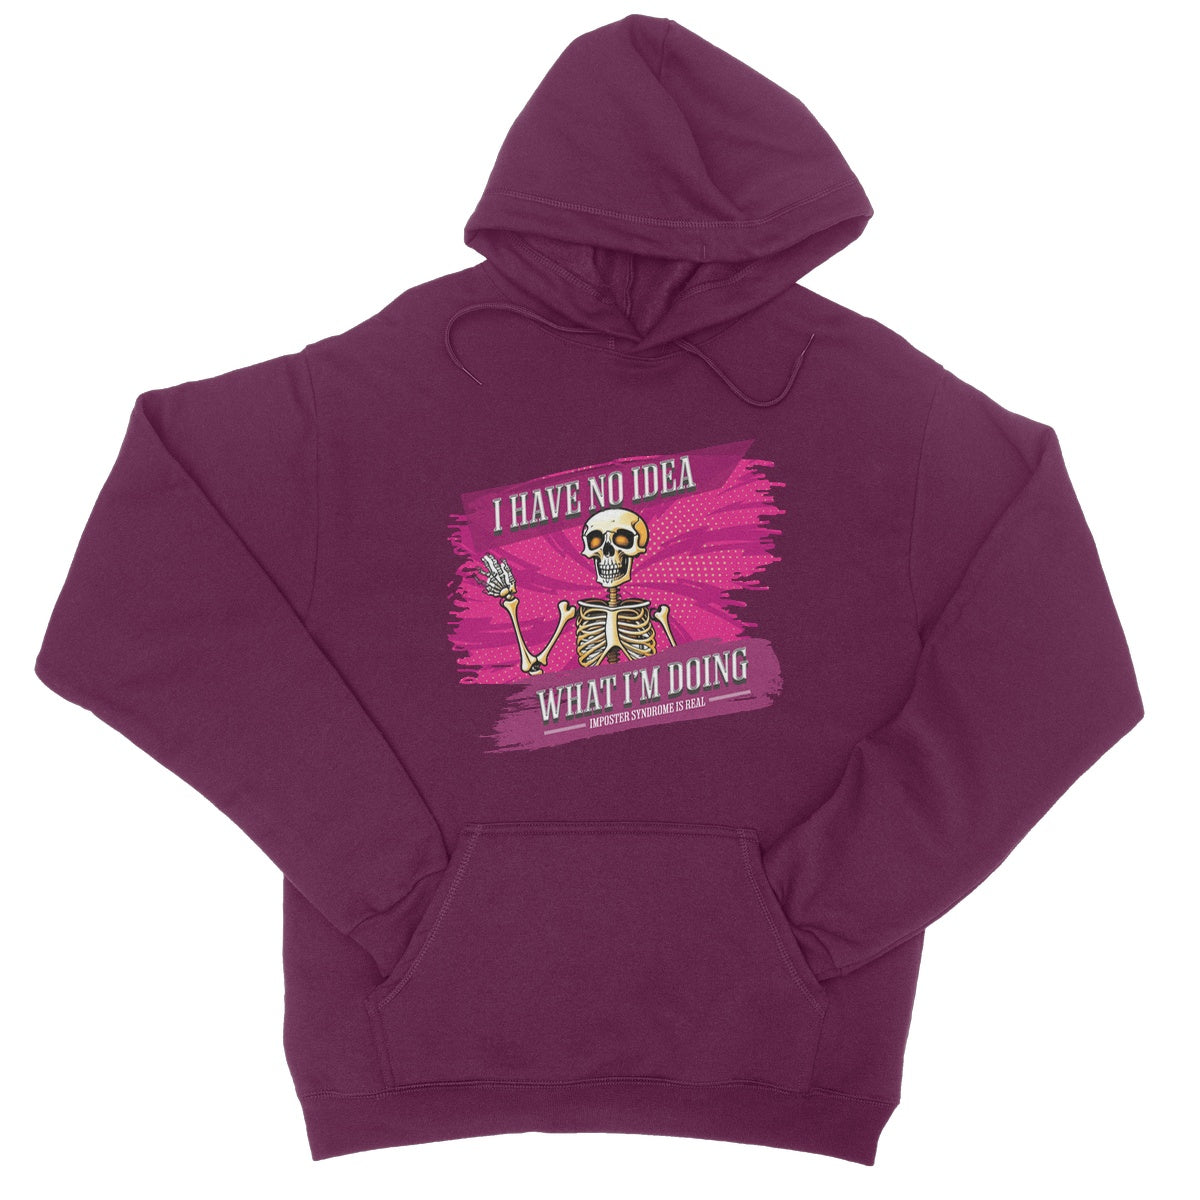 I have no idea what im doing hoodie purple